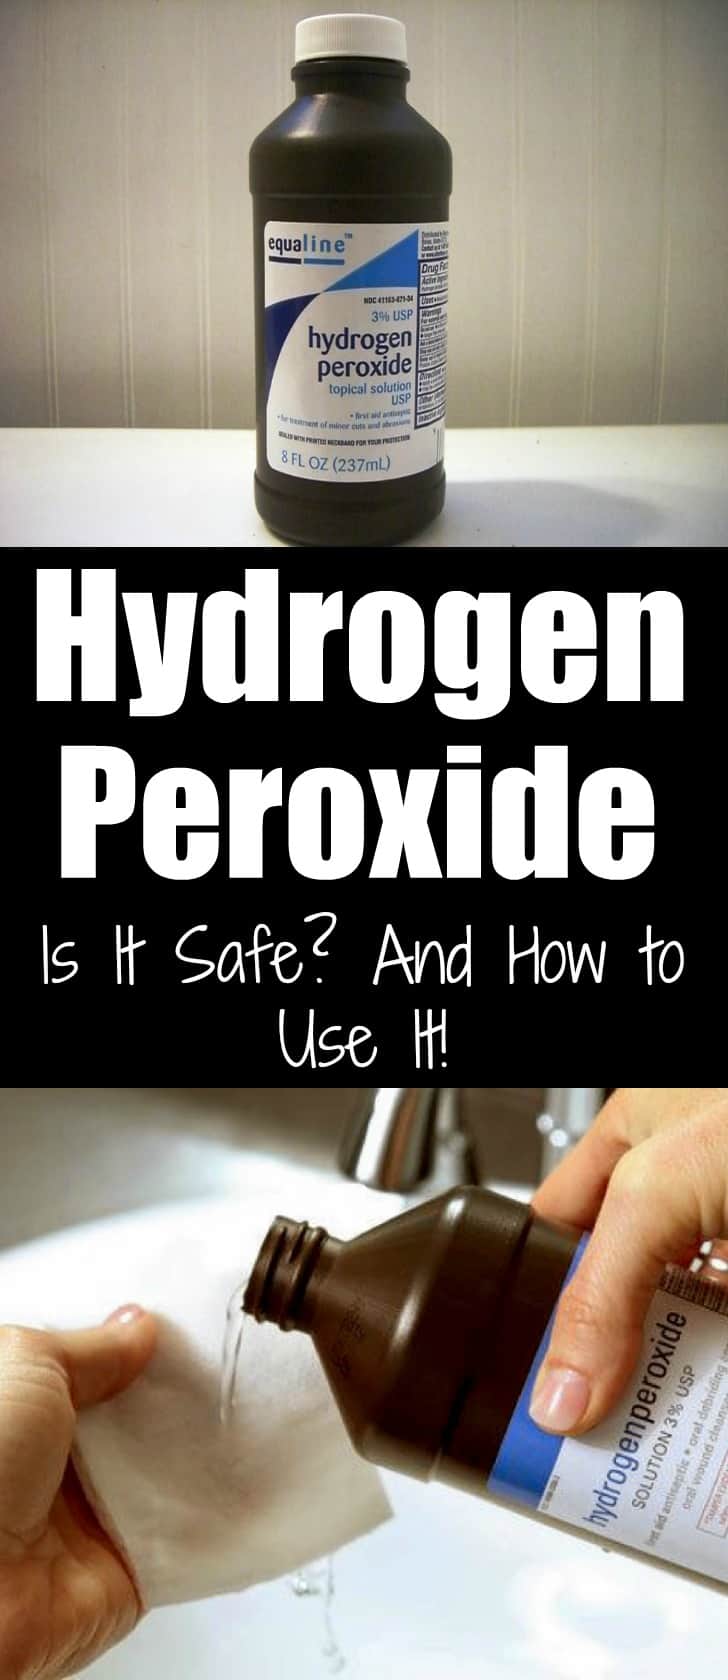 Hydrogen Peroxide: Is It Safe? And How to Use It!